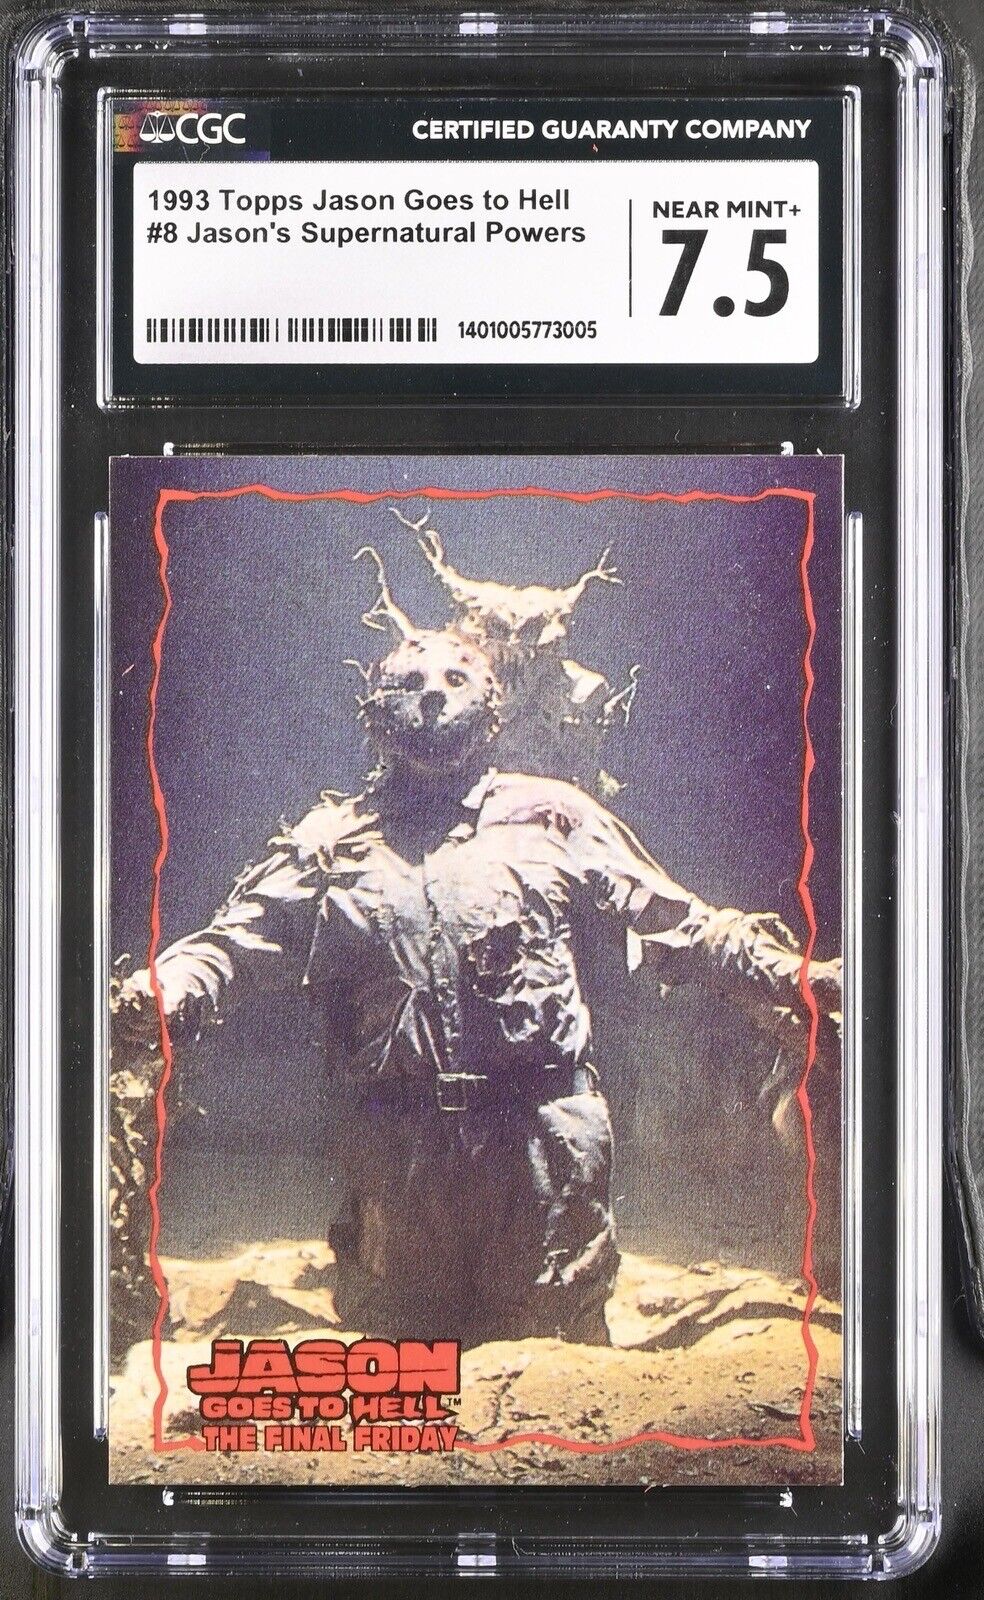 CGC 7.5 1993 Topps Jason Goes To Hell 8 Supernatural Powers NEAR MINT+ ROOKIE RC